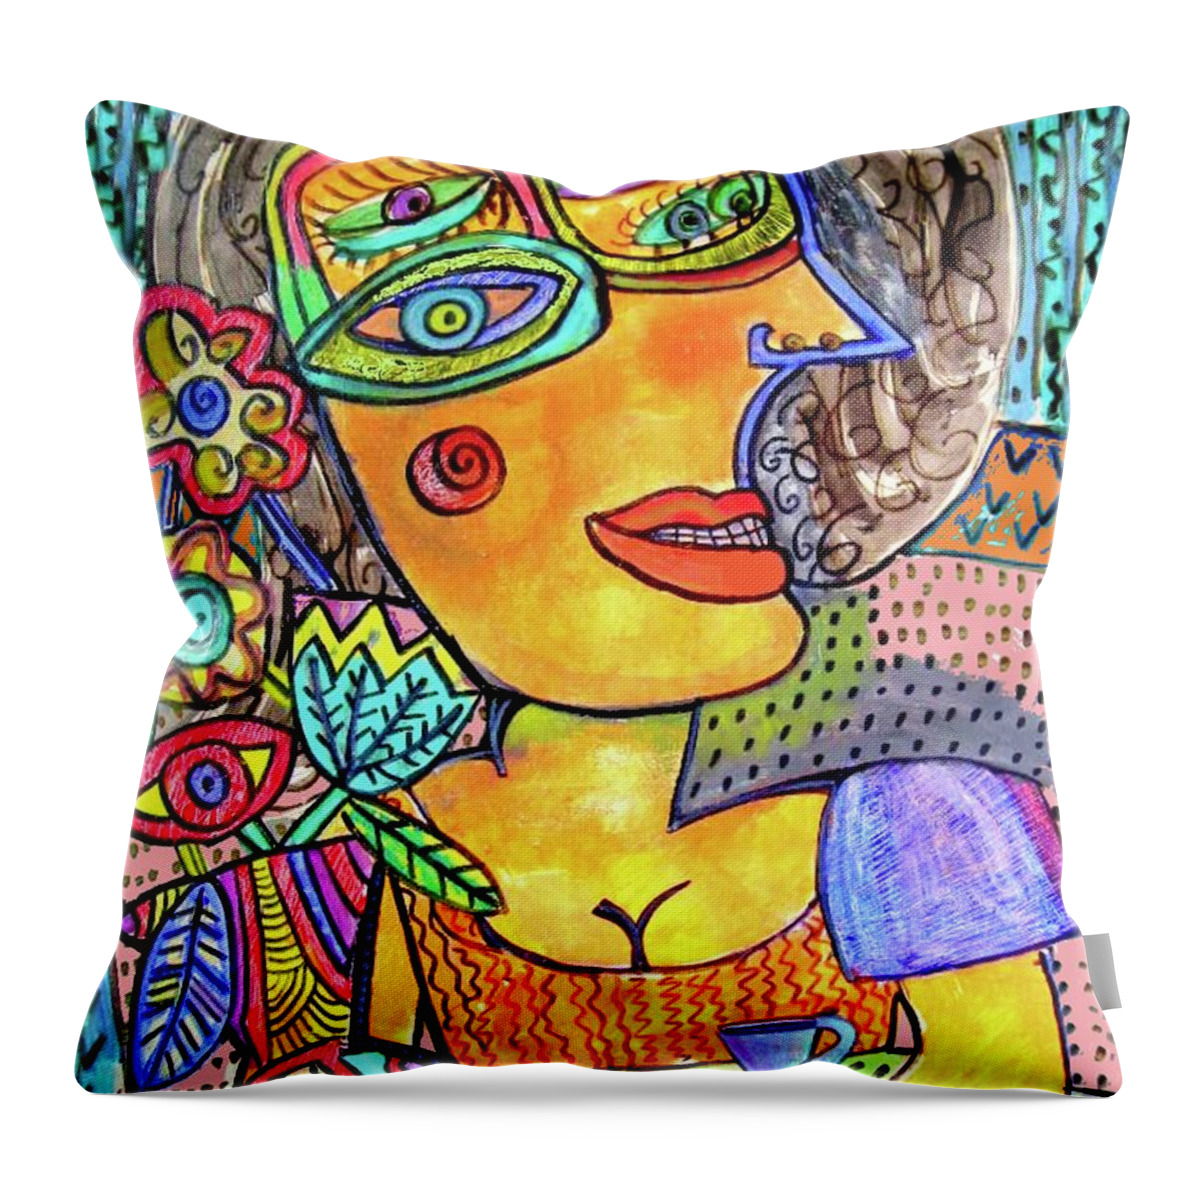 Wild Throw Pillow featuring the painting Wild Eyes Garden Cafe by Sandra Silberzweig